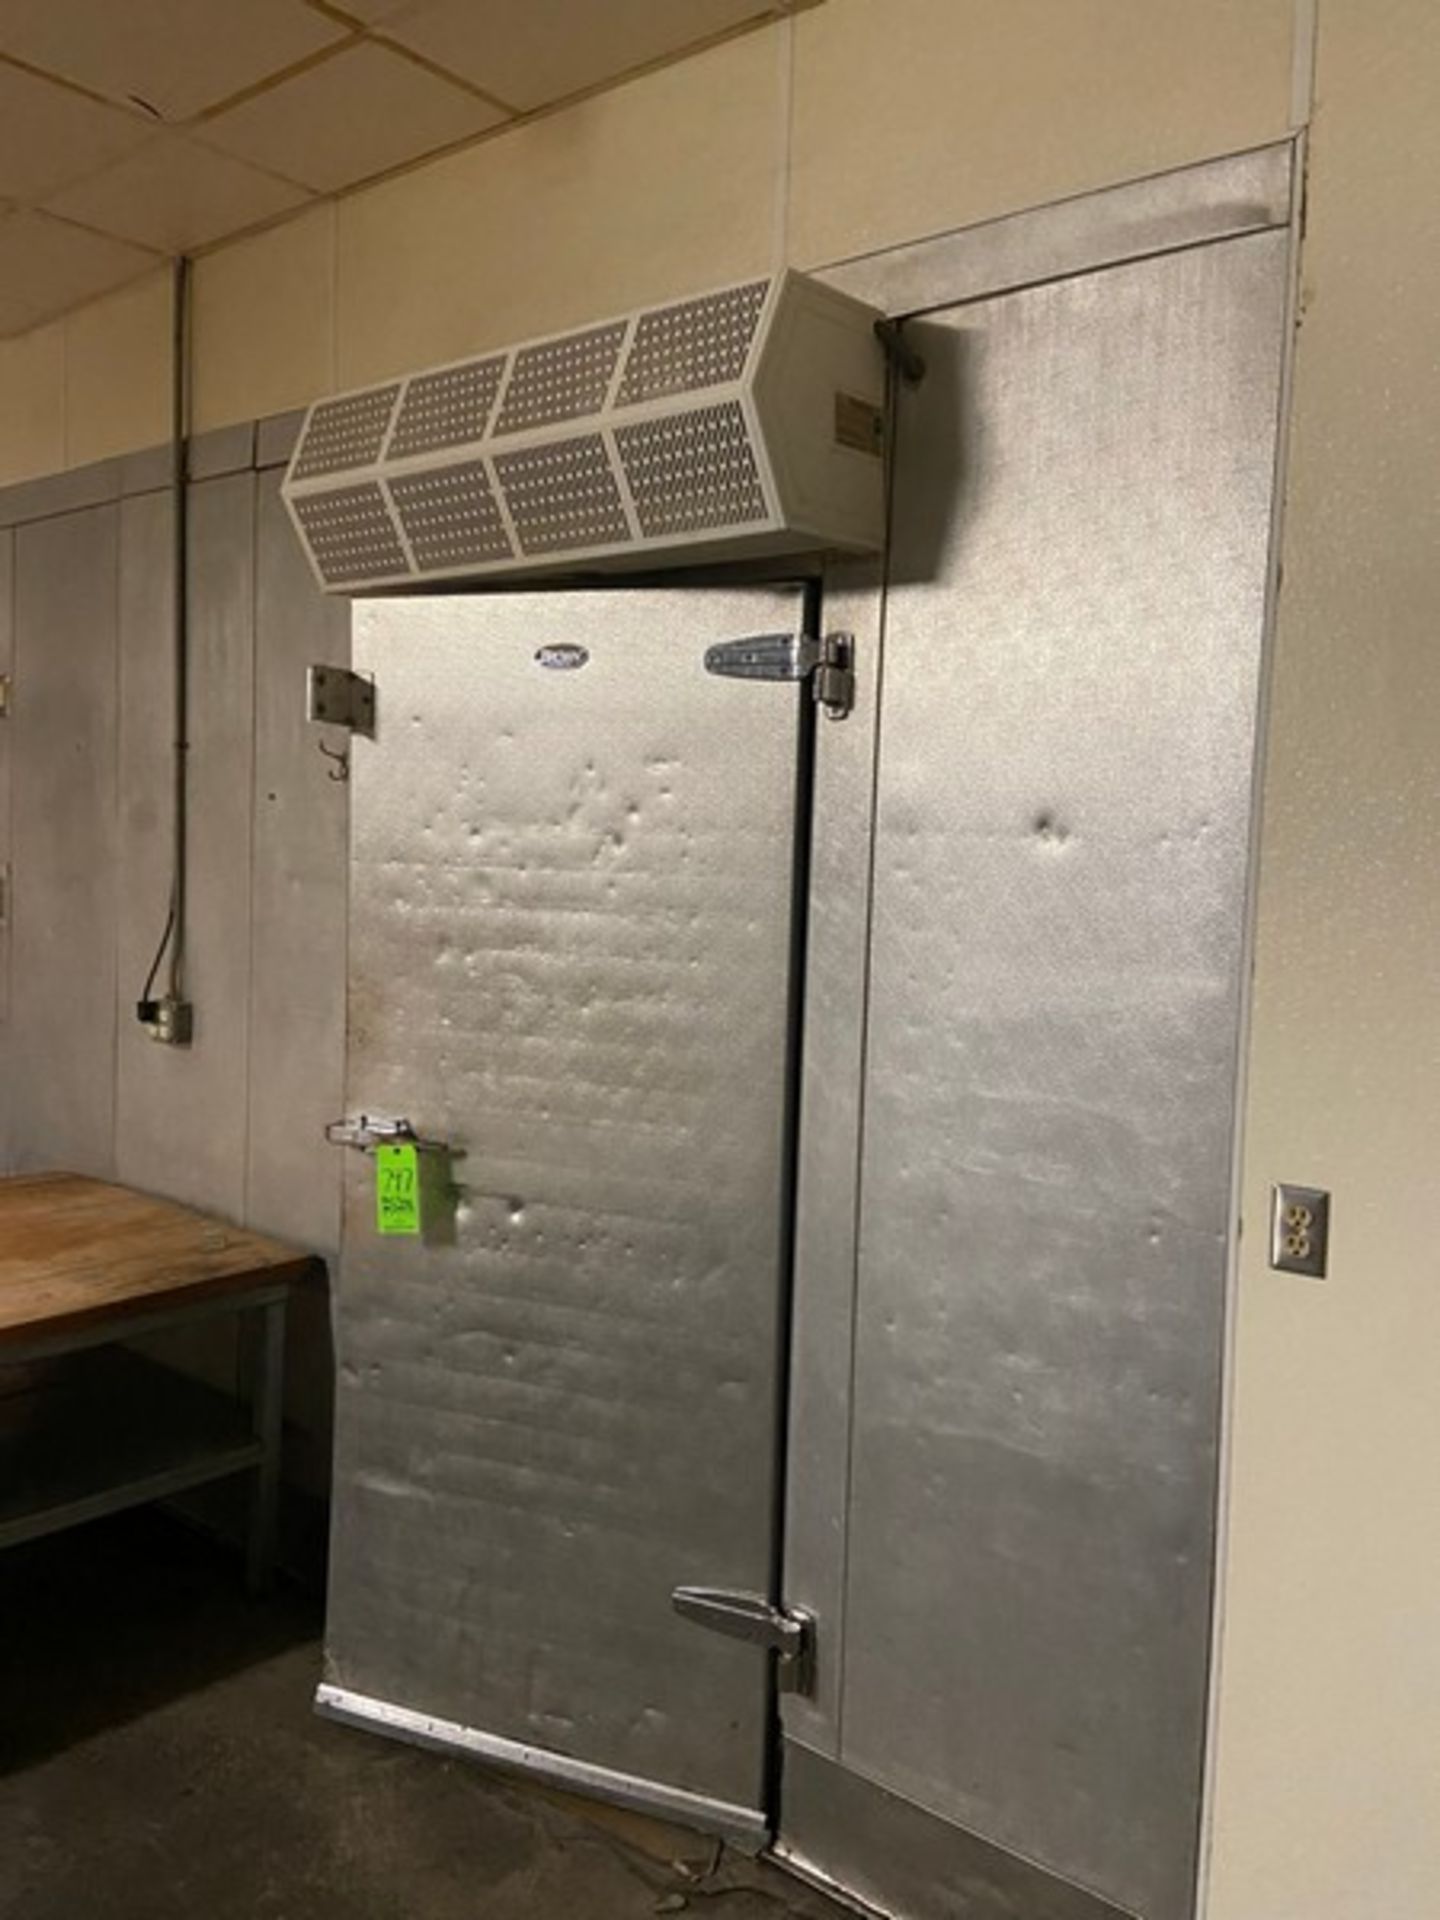 WALK-IN BLAST FREEZER, WITH (2) WERNER 3-FAN BLOWER UNITS INSIDE THE UNITS, WITH (2) DOORS (LOCATED